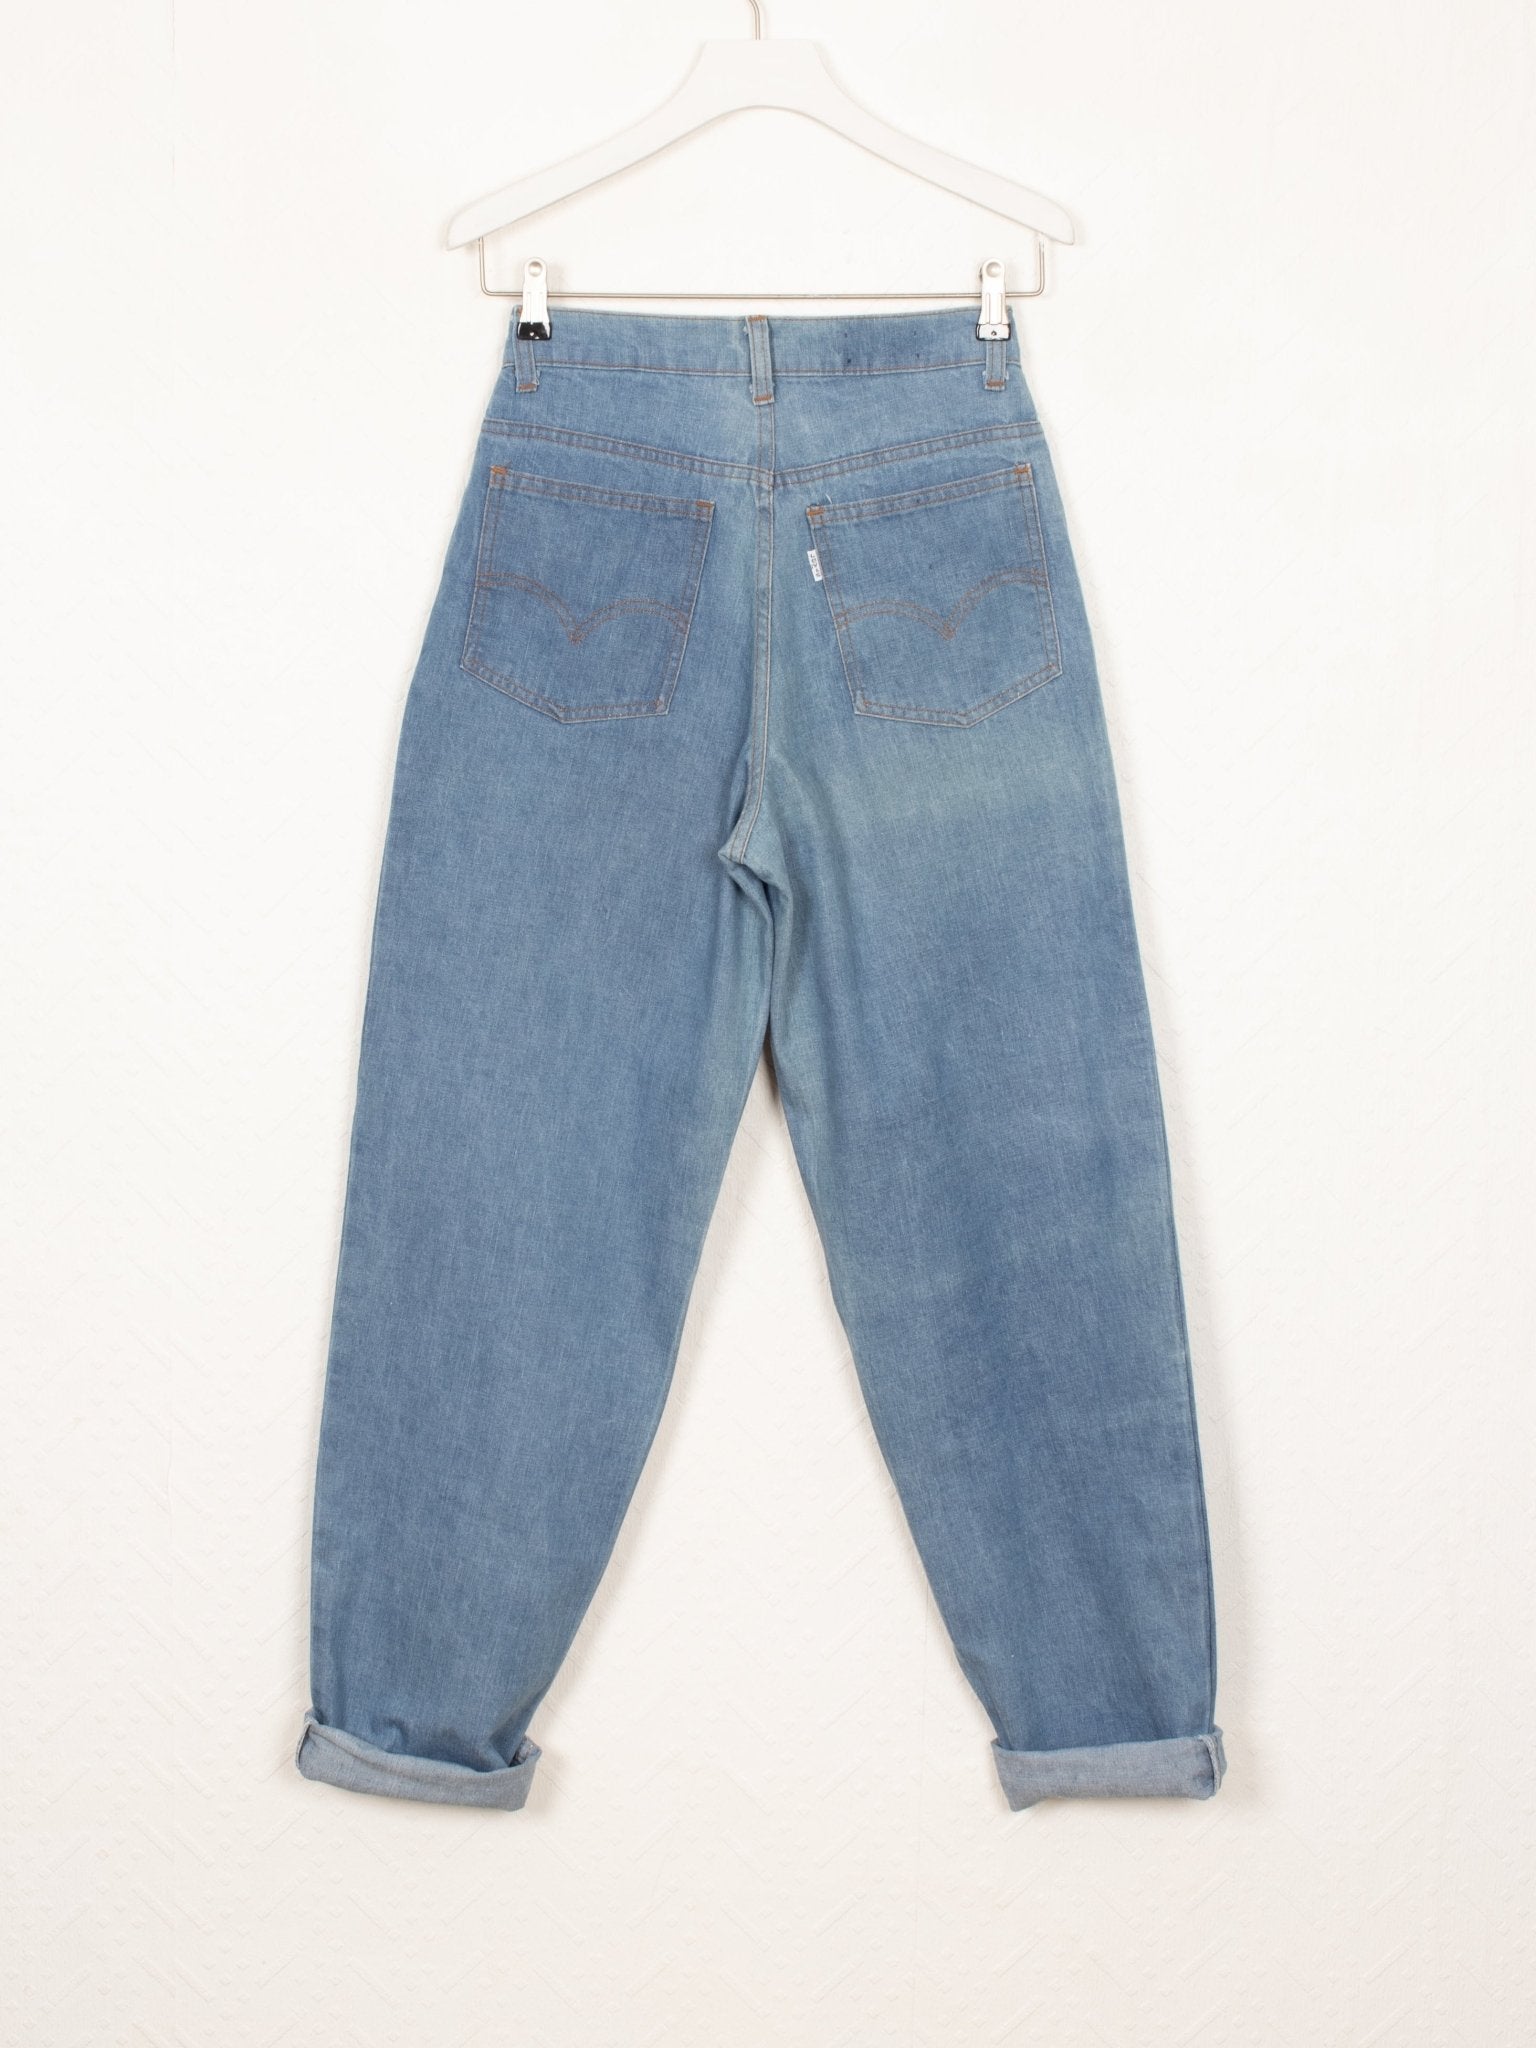 1980s Levi's 616 Faded High Waist Loose Taper Jeans